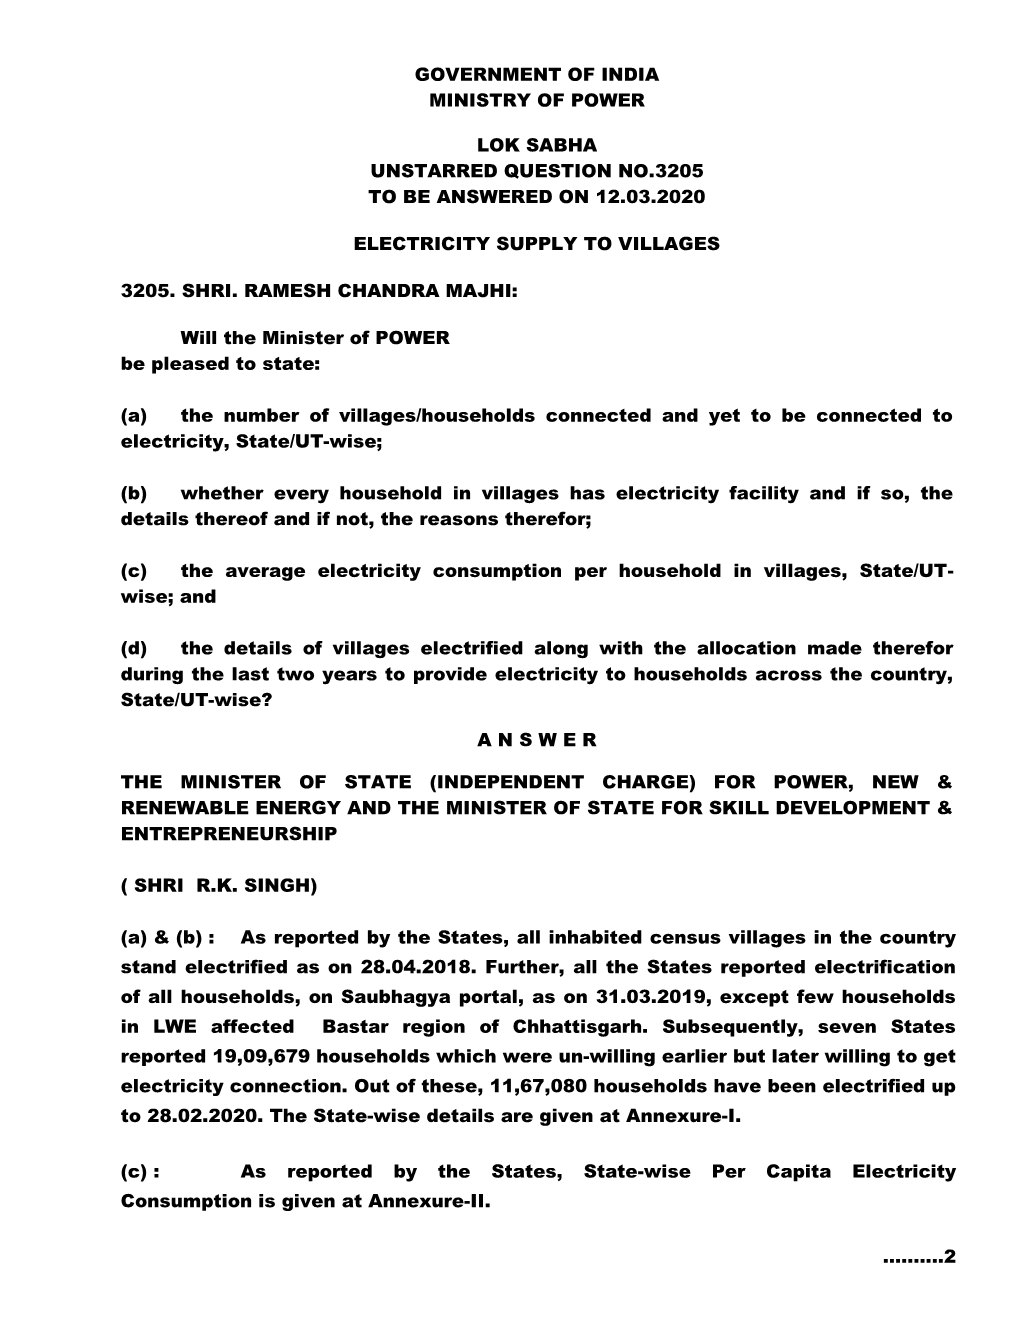 Government of India Ministry of Power Lok Sabha Unstarred Question No.3205 to Be Answered on 12.03.2020 Electricity Supply to V